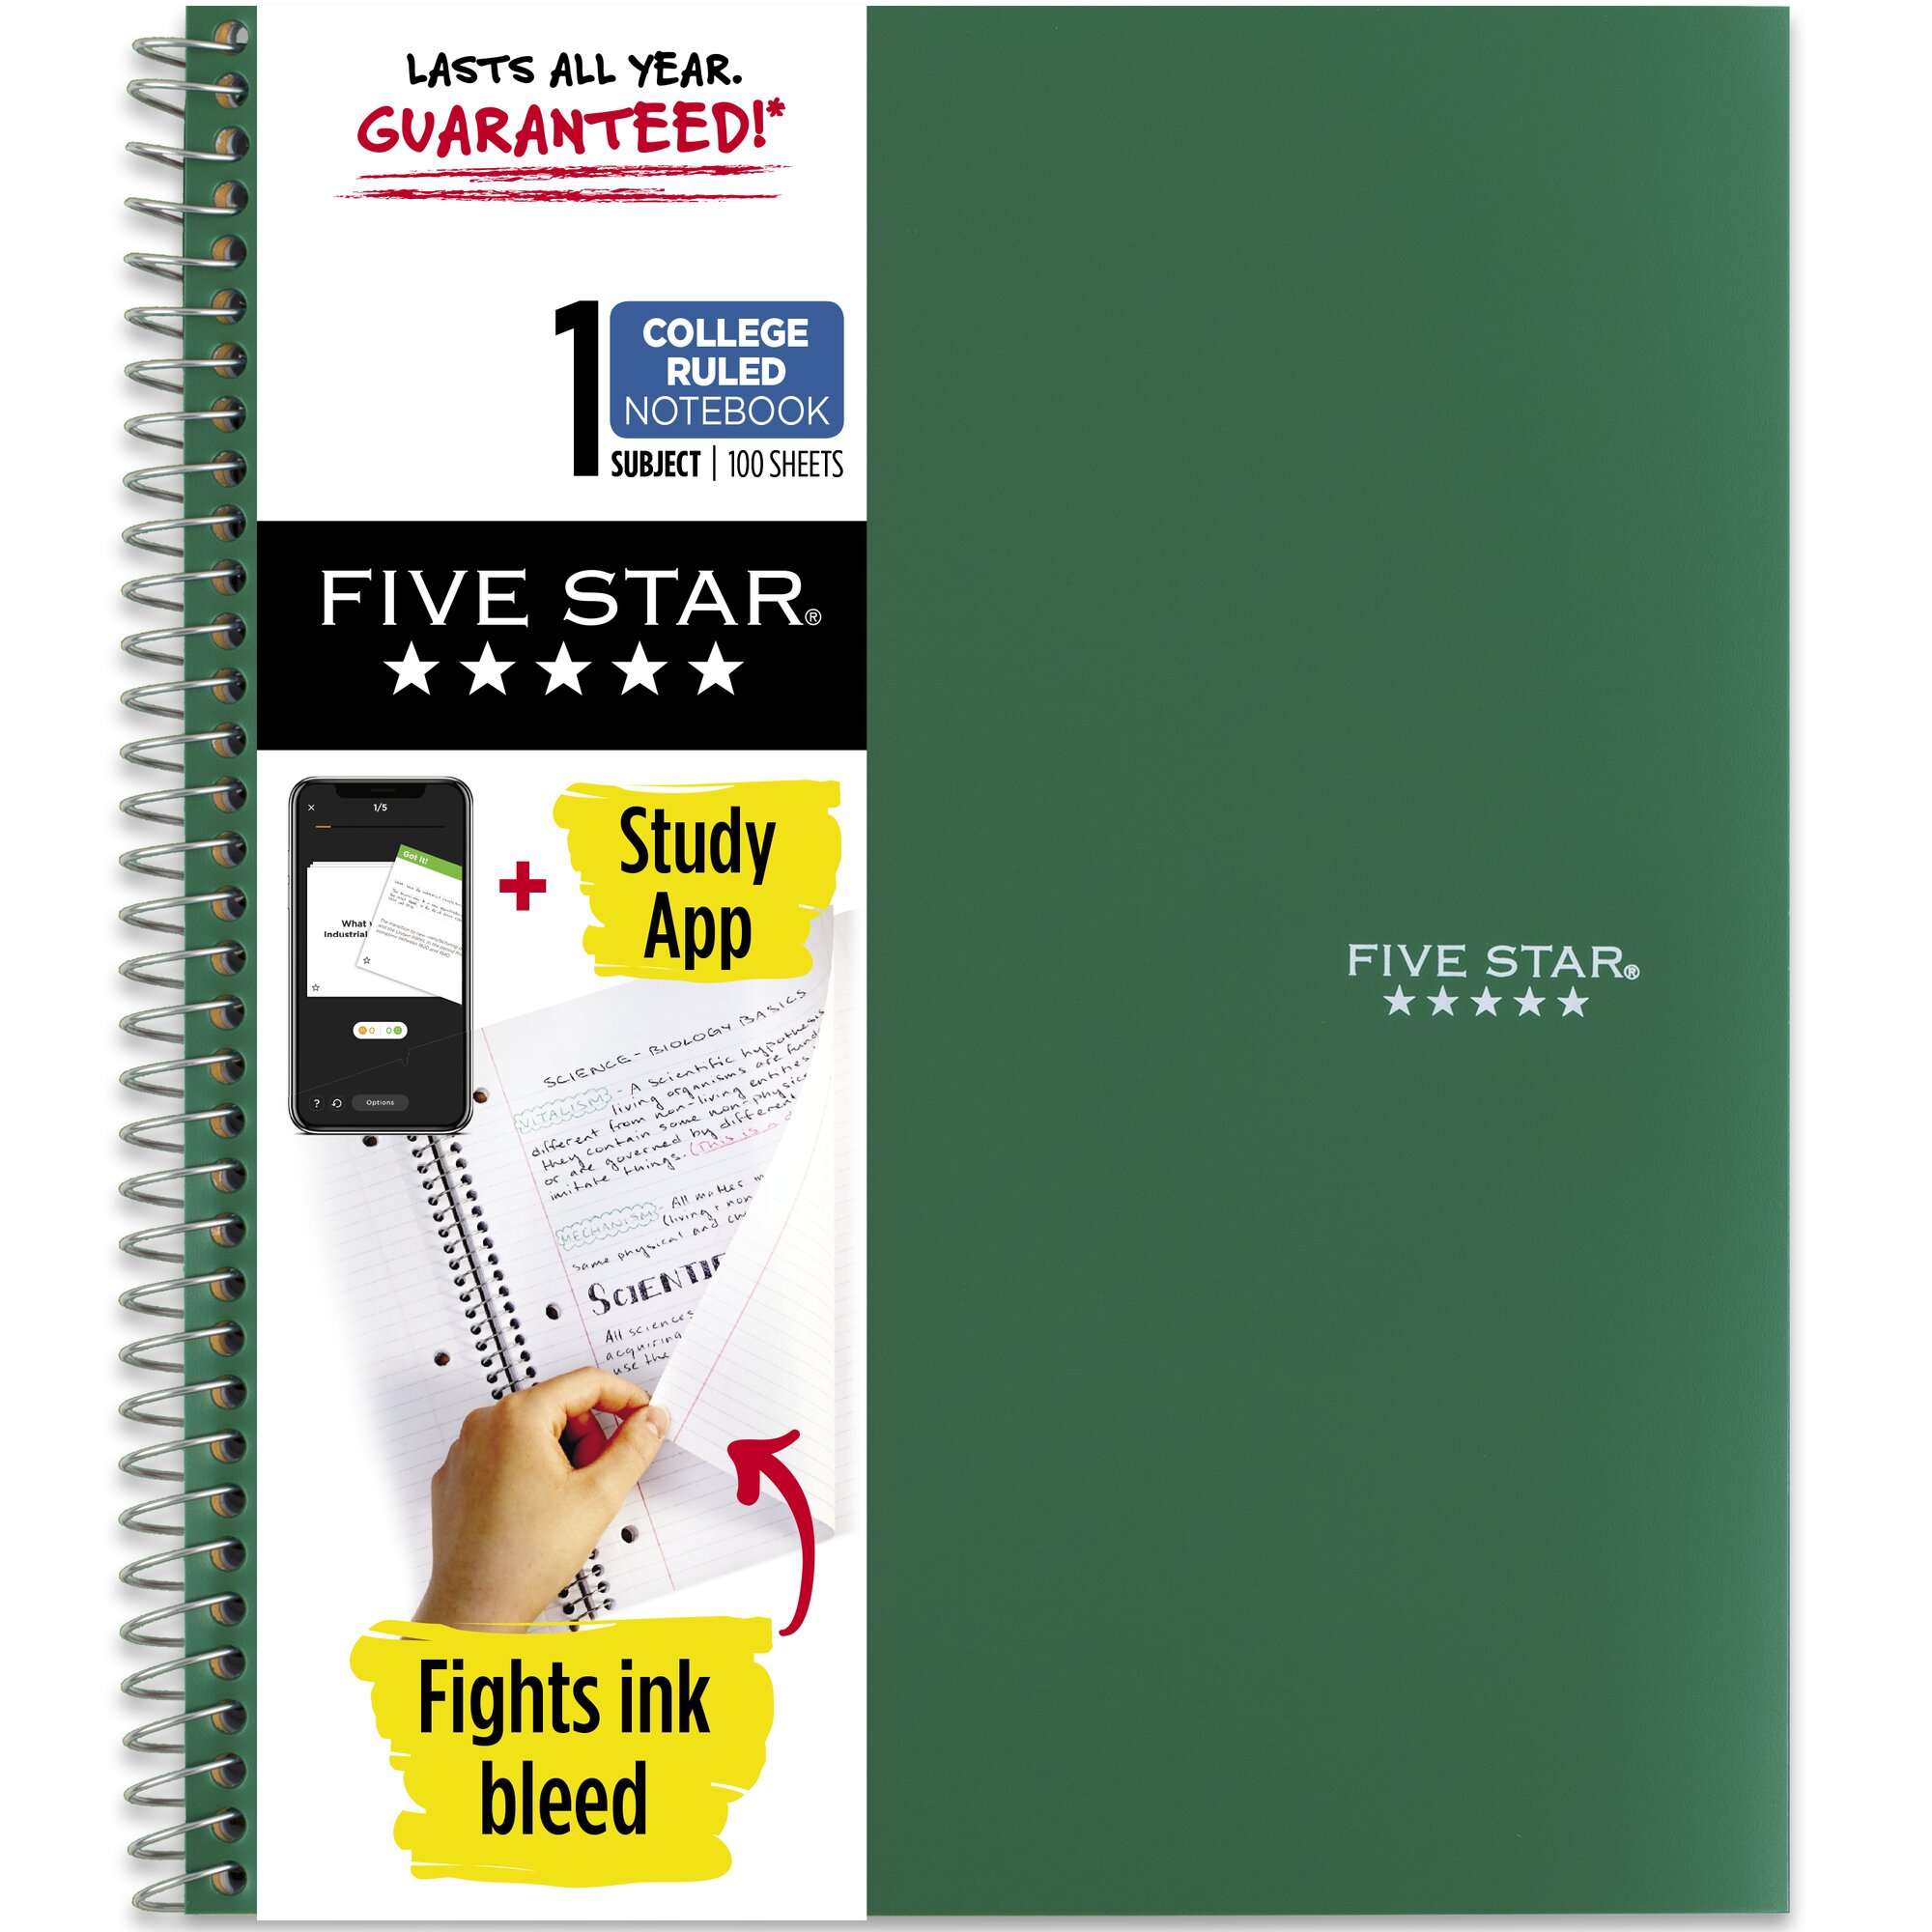 Five Star Wirebound Notebook Plus Study App, 1 Subject, College Ruled, Forest Green (820002CE1-WMT-MOD) - image 1 of 9